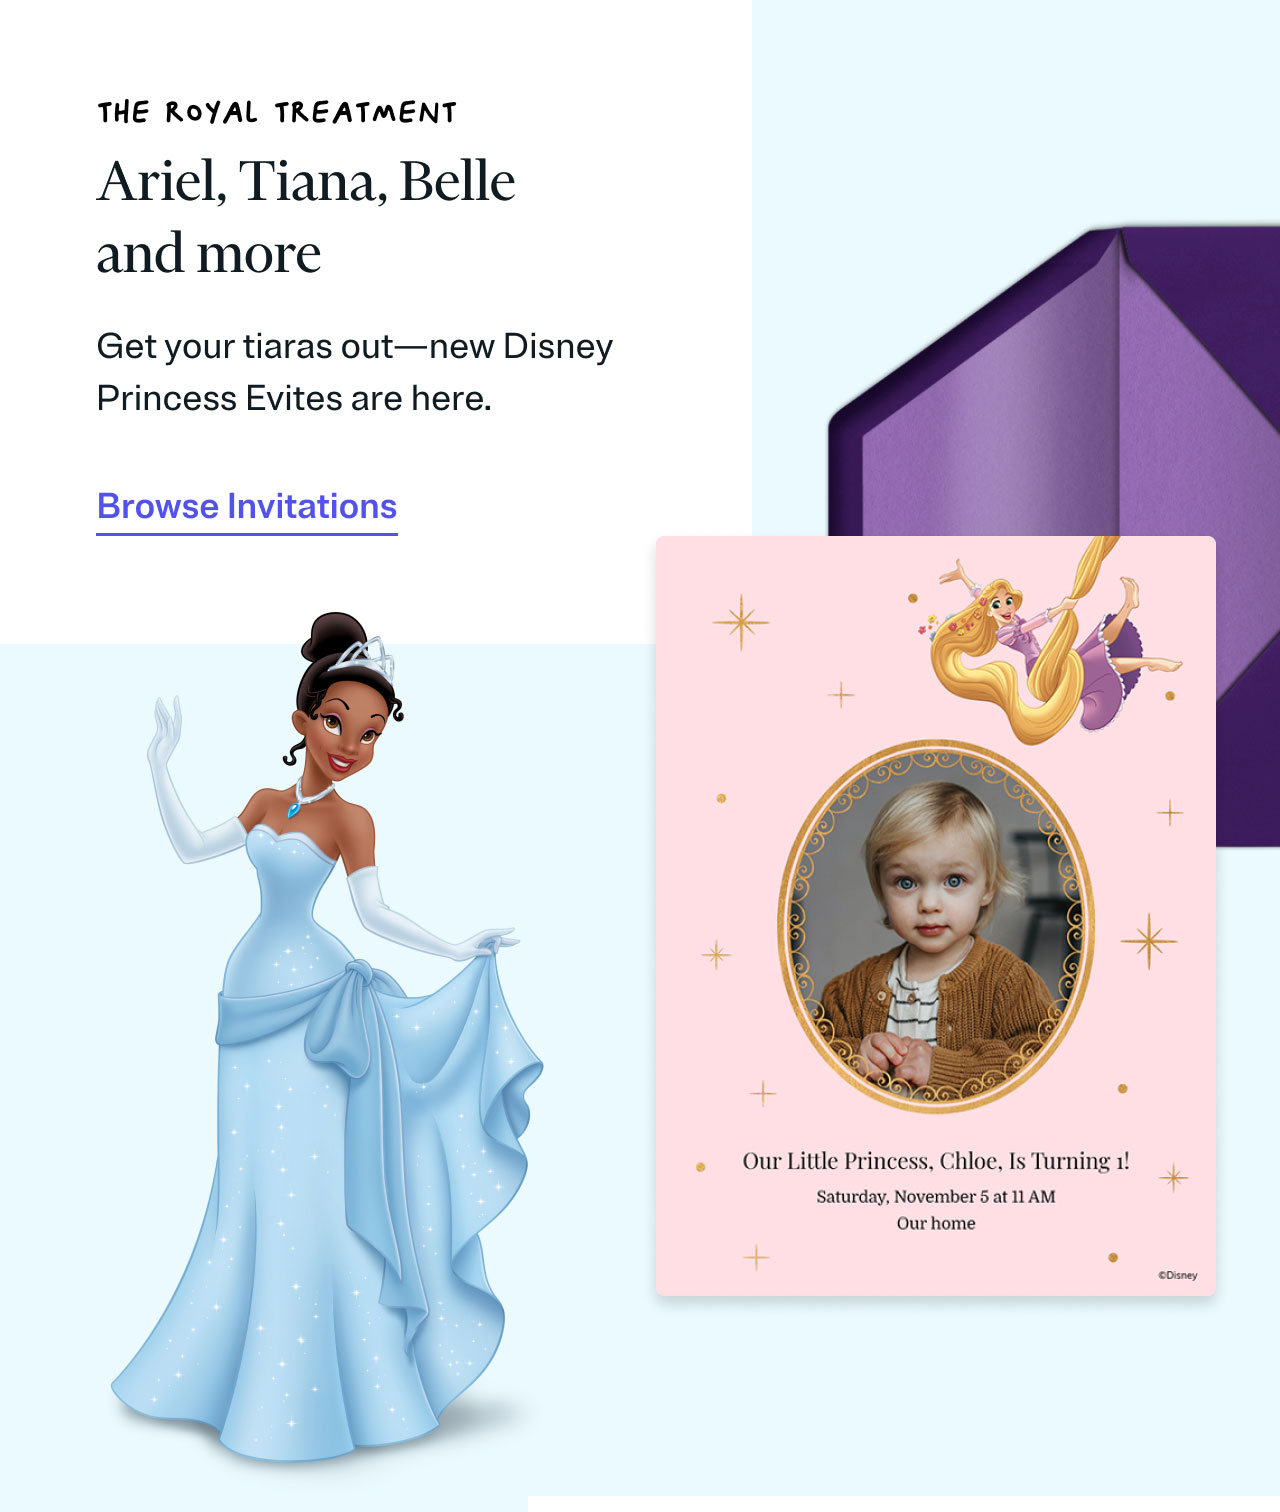 The Royal Treatment | Ariel, Tiana, Belle and more | Get your tiaras out—new Disney Princess Evites are here.